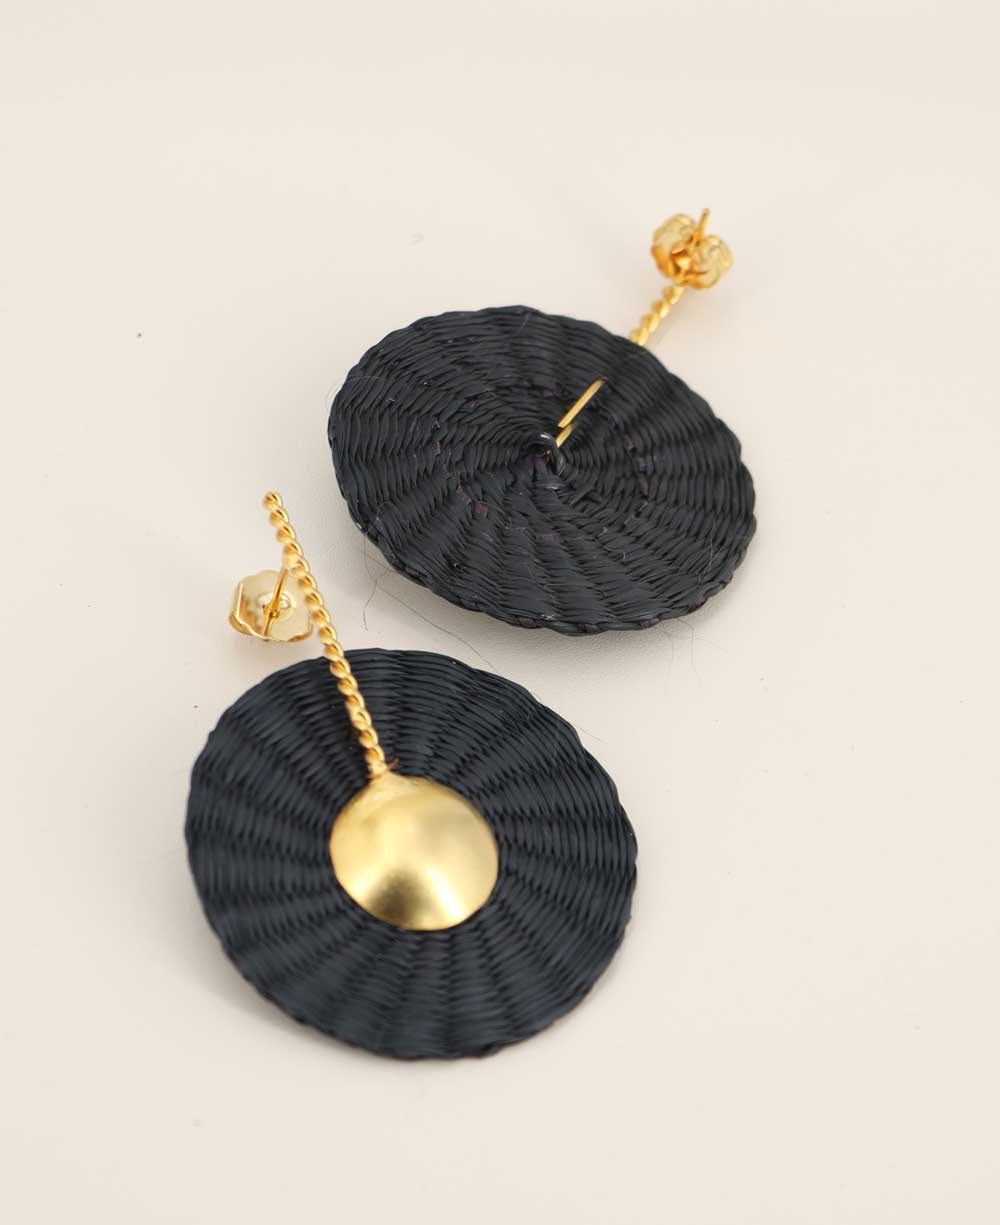 Handwoven black and gold palm disc earrings